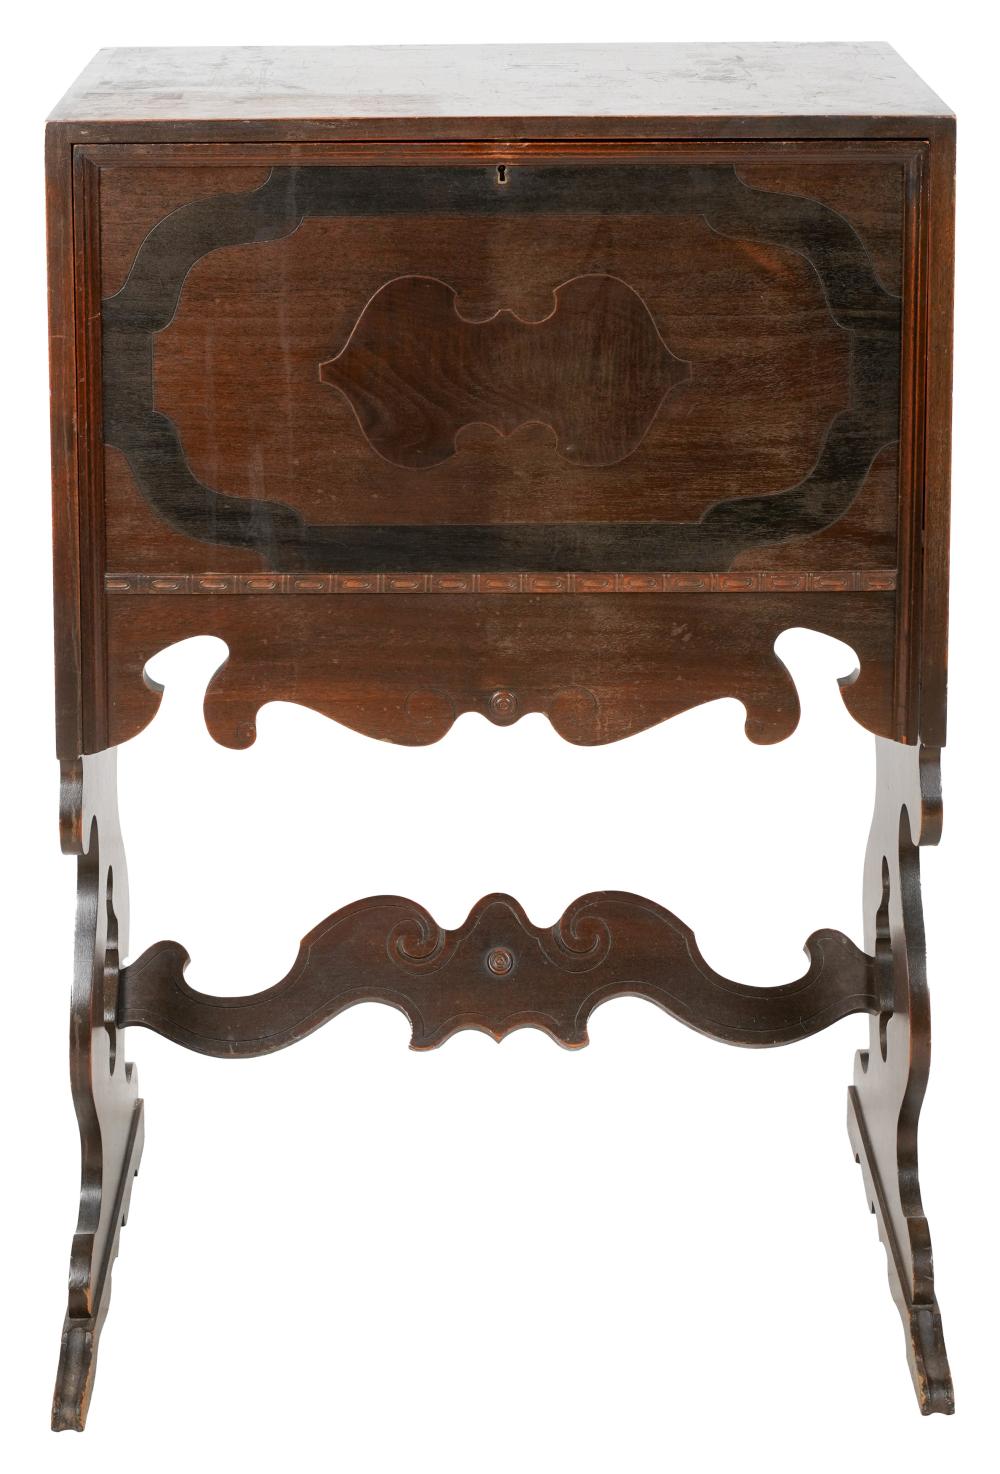 BAROQUE-STYLE INLAID FALL-FRONT